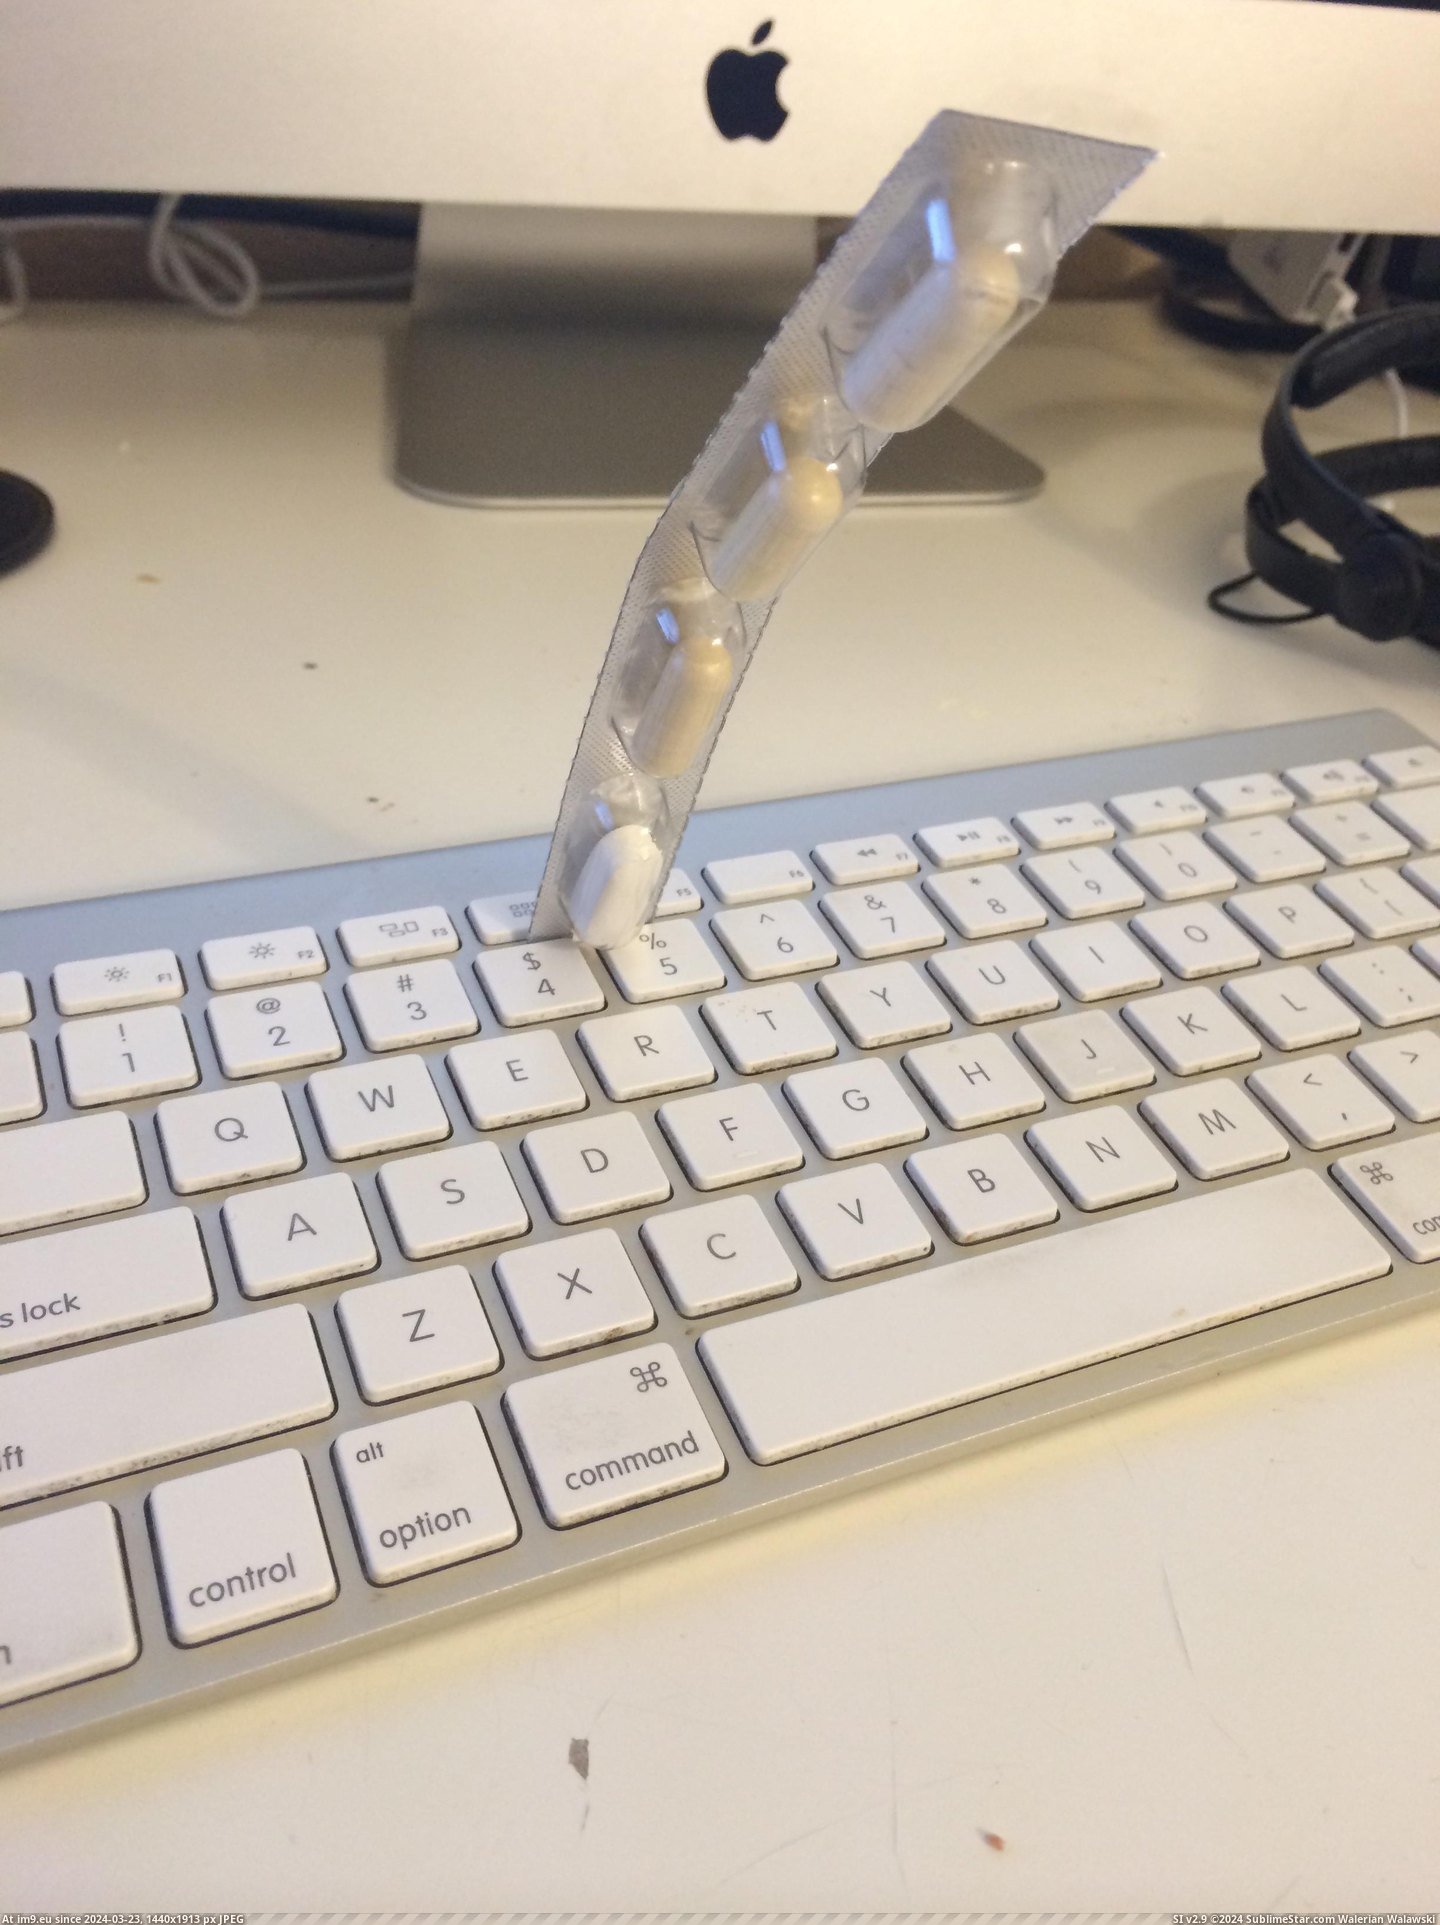 #Room #Strip #Tossed #Pills #Desk #Landed [Mildlyinteresting] Tossed a strip of pills at my desk from across the room and they landed like this. Pic. (Bild von album My r/MILDLYINTERESTING favs))